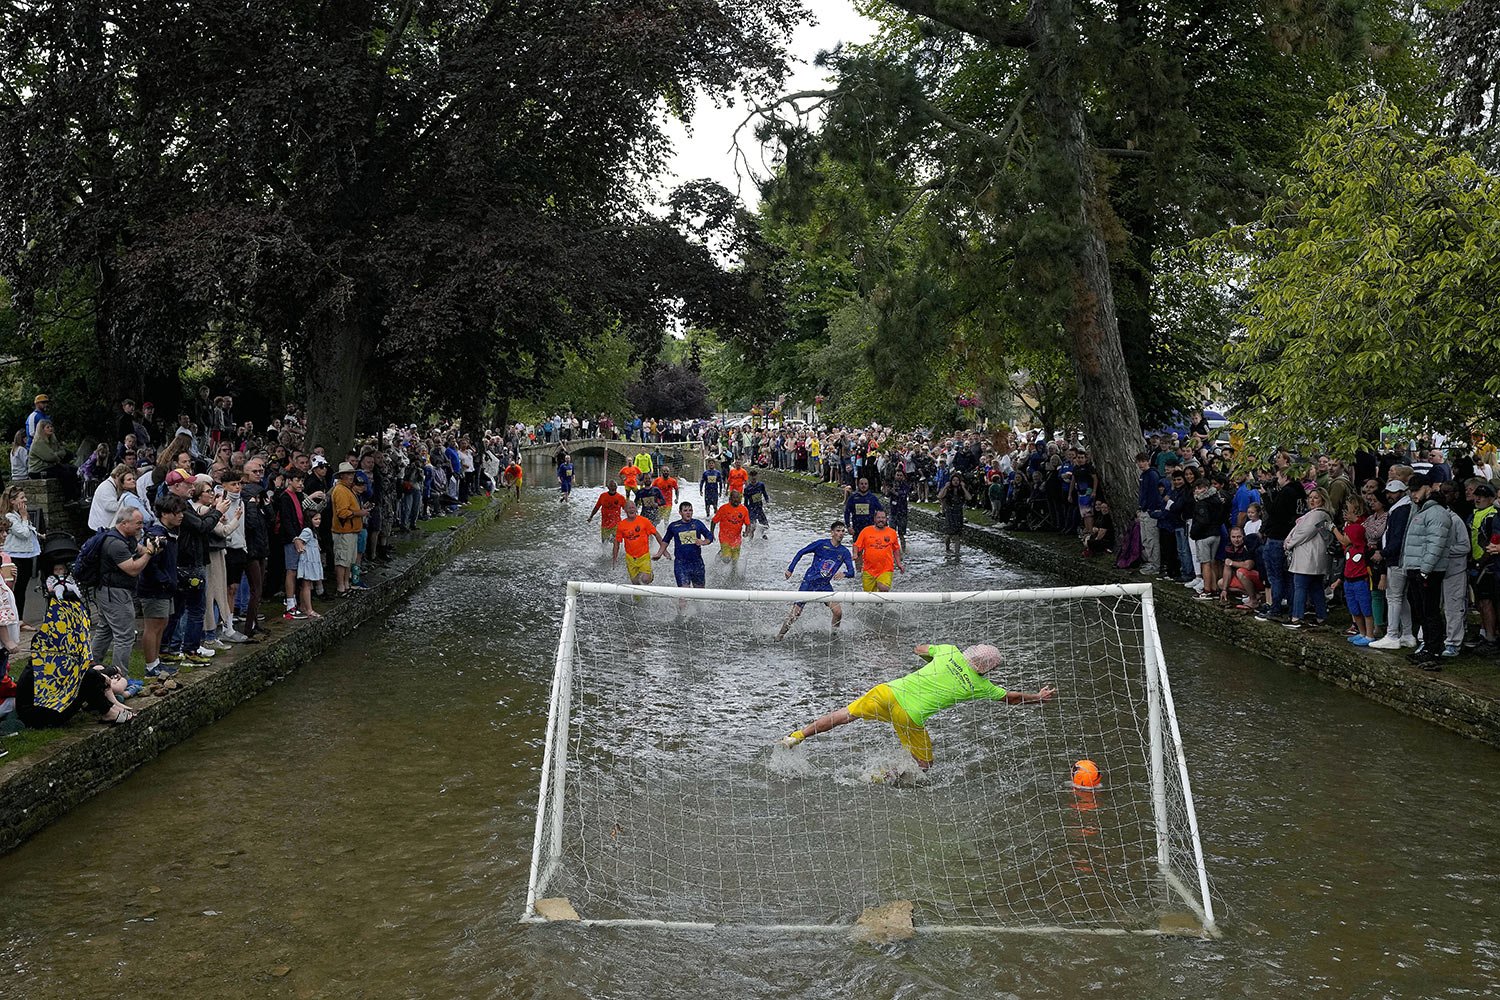  Bourton Rovers players compete during the annual traditional River Windrush soccer match, which has been taking place for over 100 years, in the Cotswolds village of Bourton-on-the-Water, England, Aug. 28, 2023. The event sees two teams of six from 